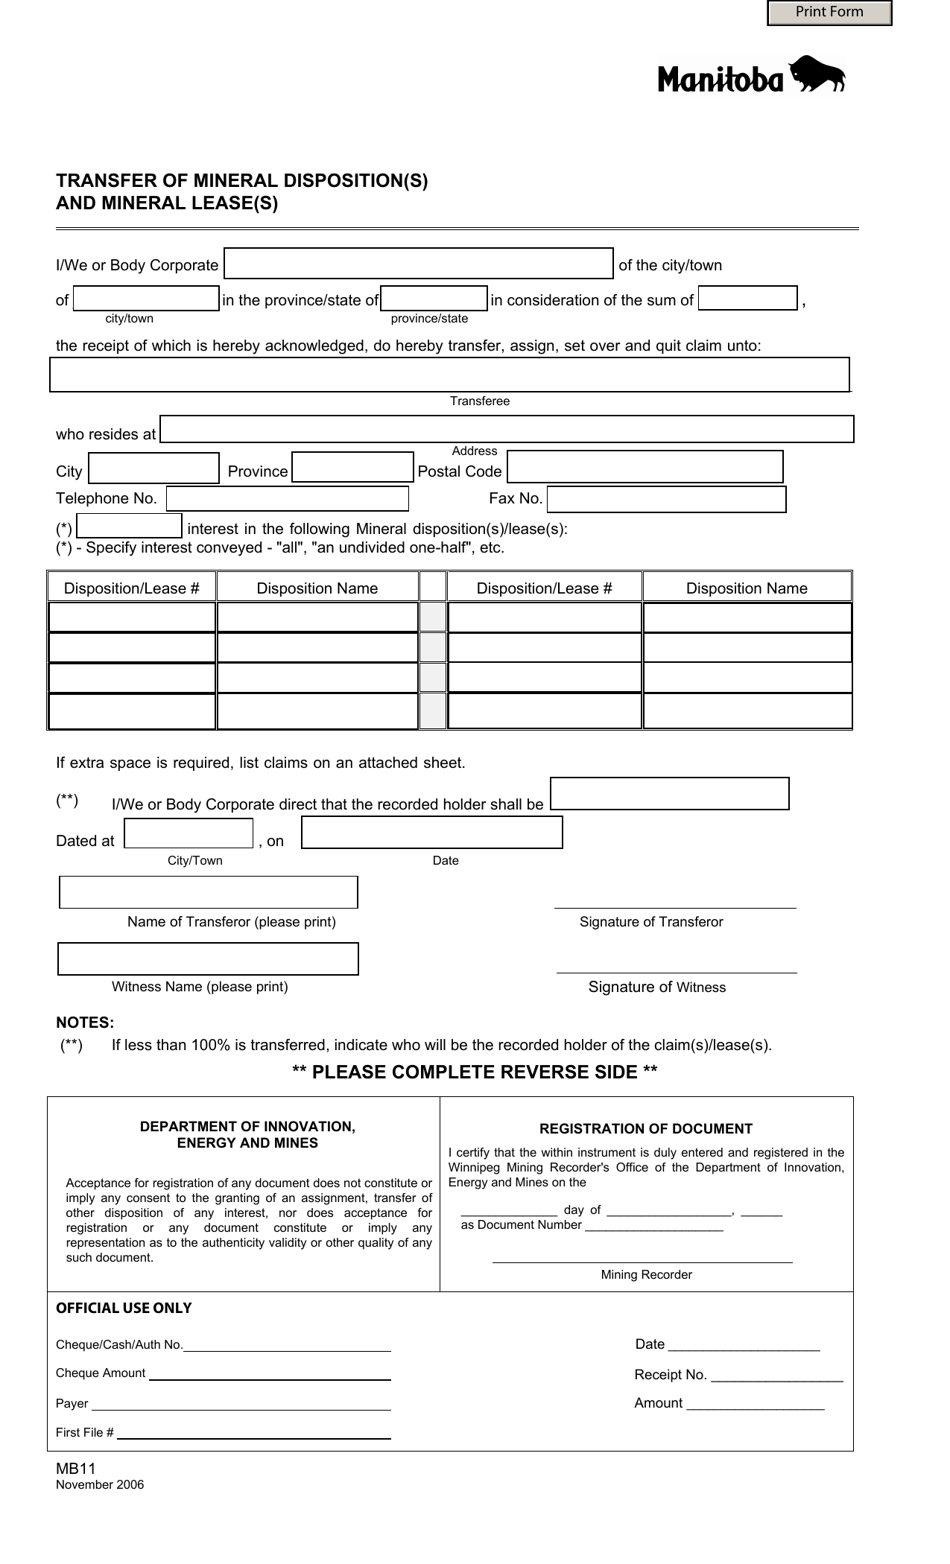 Form MB11 Transfer of Mineral Disposition(S) and Mineral Lease(S) - Manitoba, Canada, Page 1